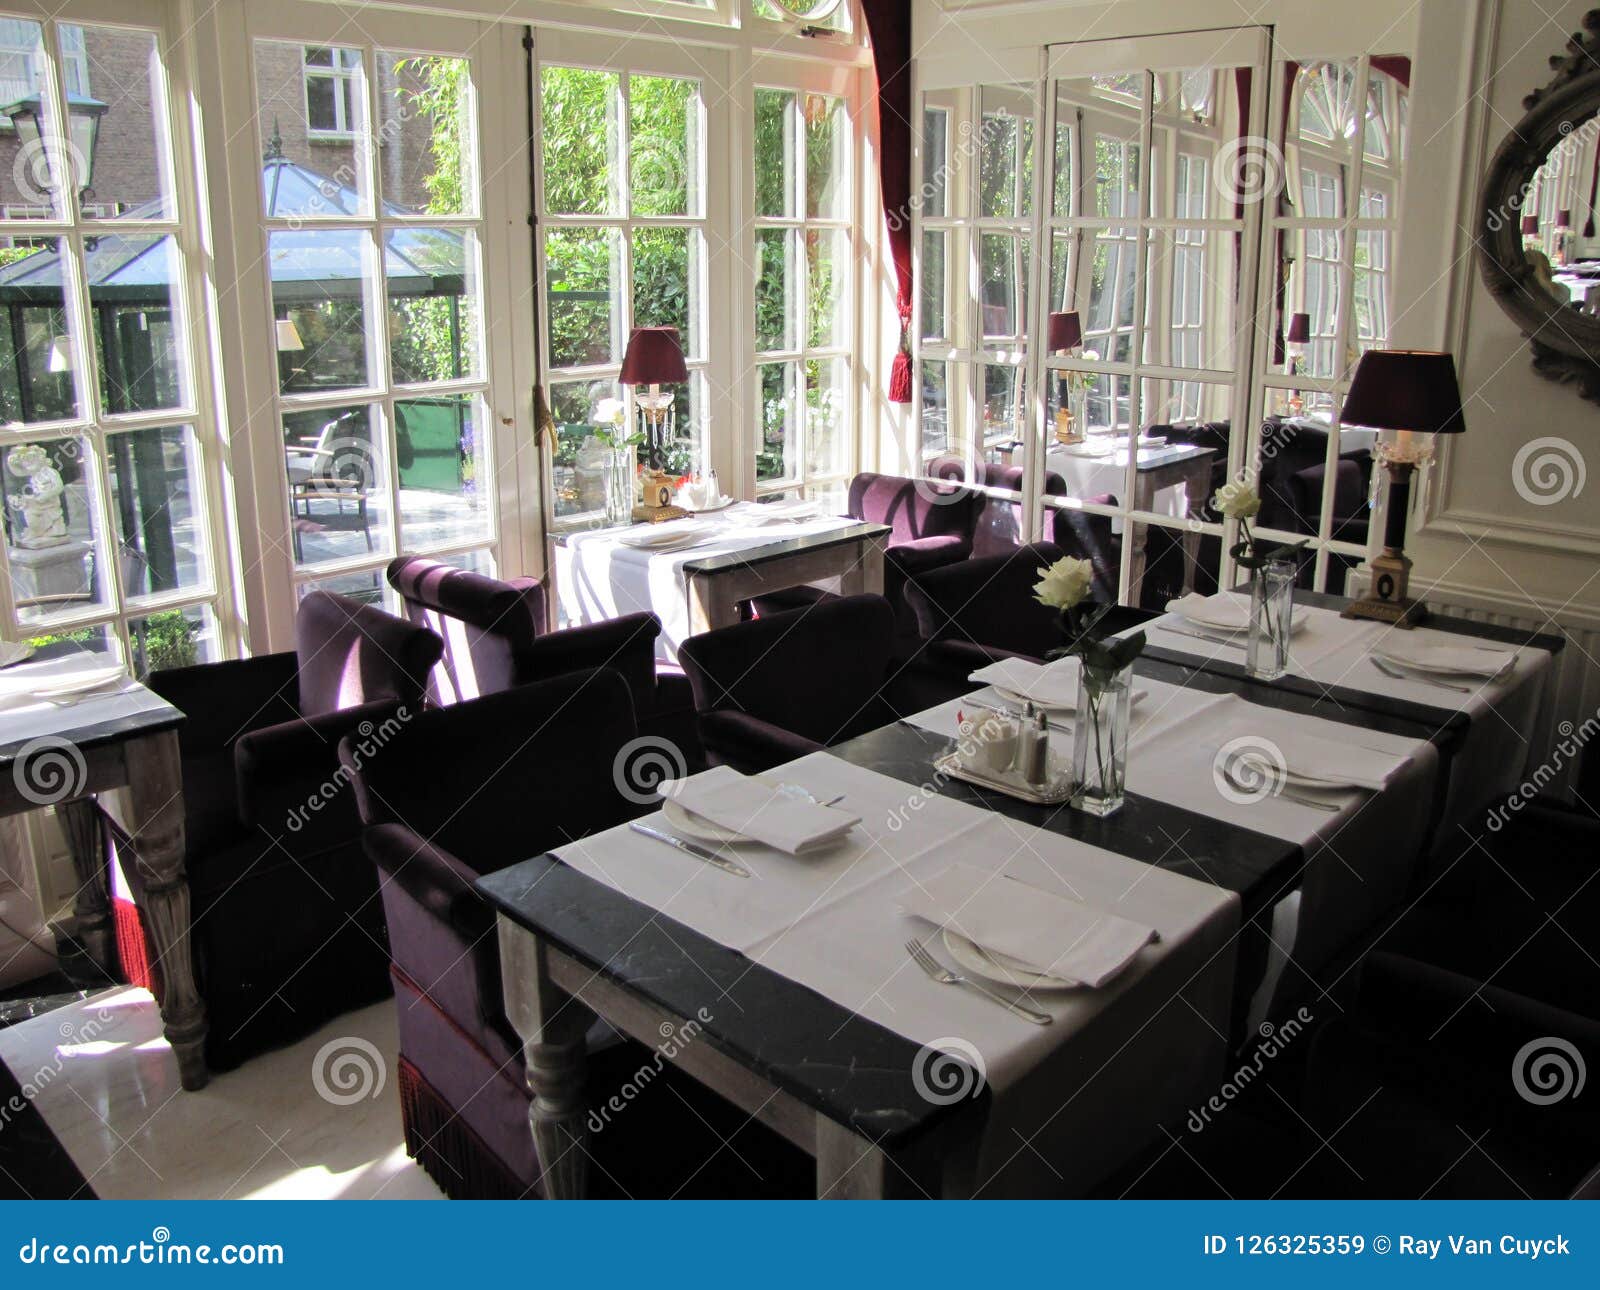 Gorgeous Setting Inside And Out For Dining Stock Image Image Of